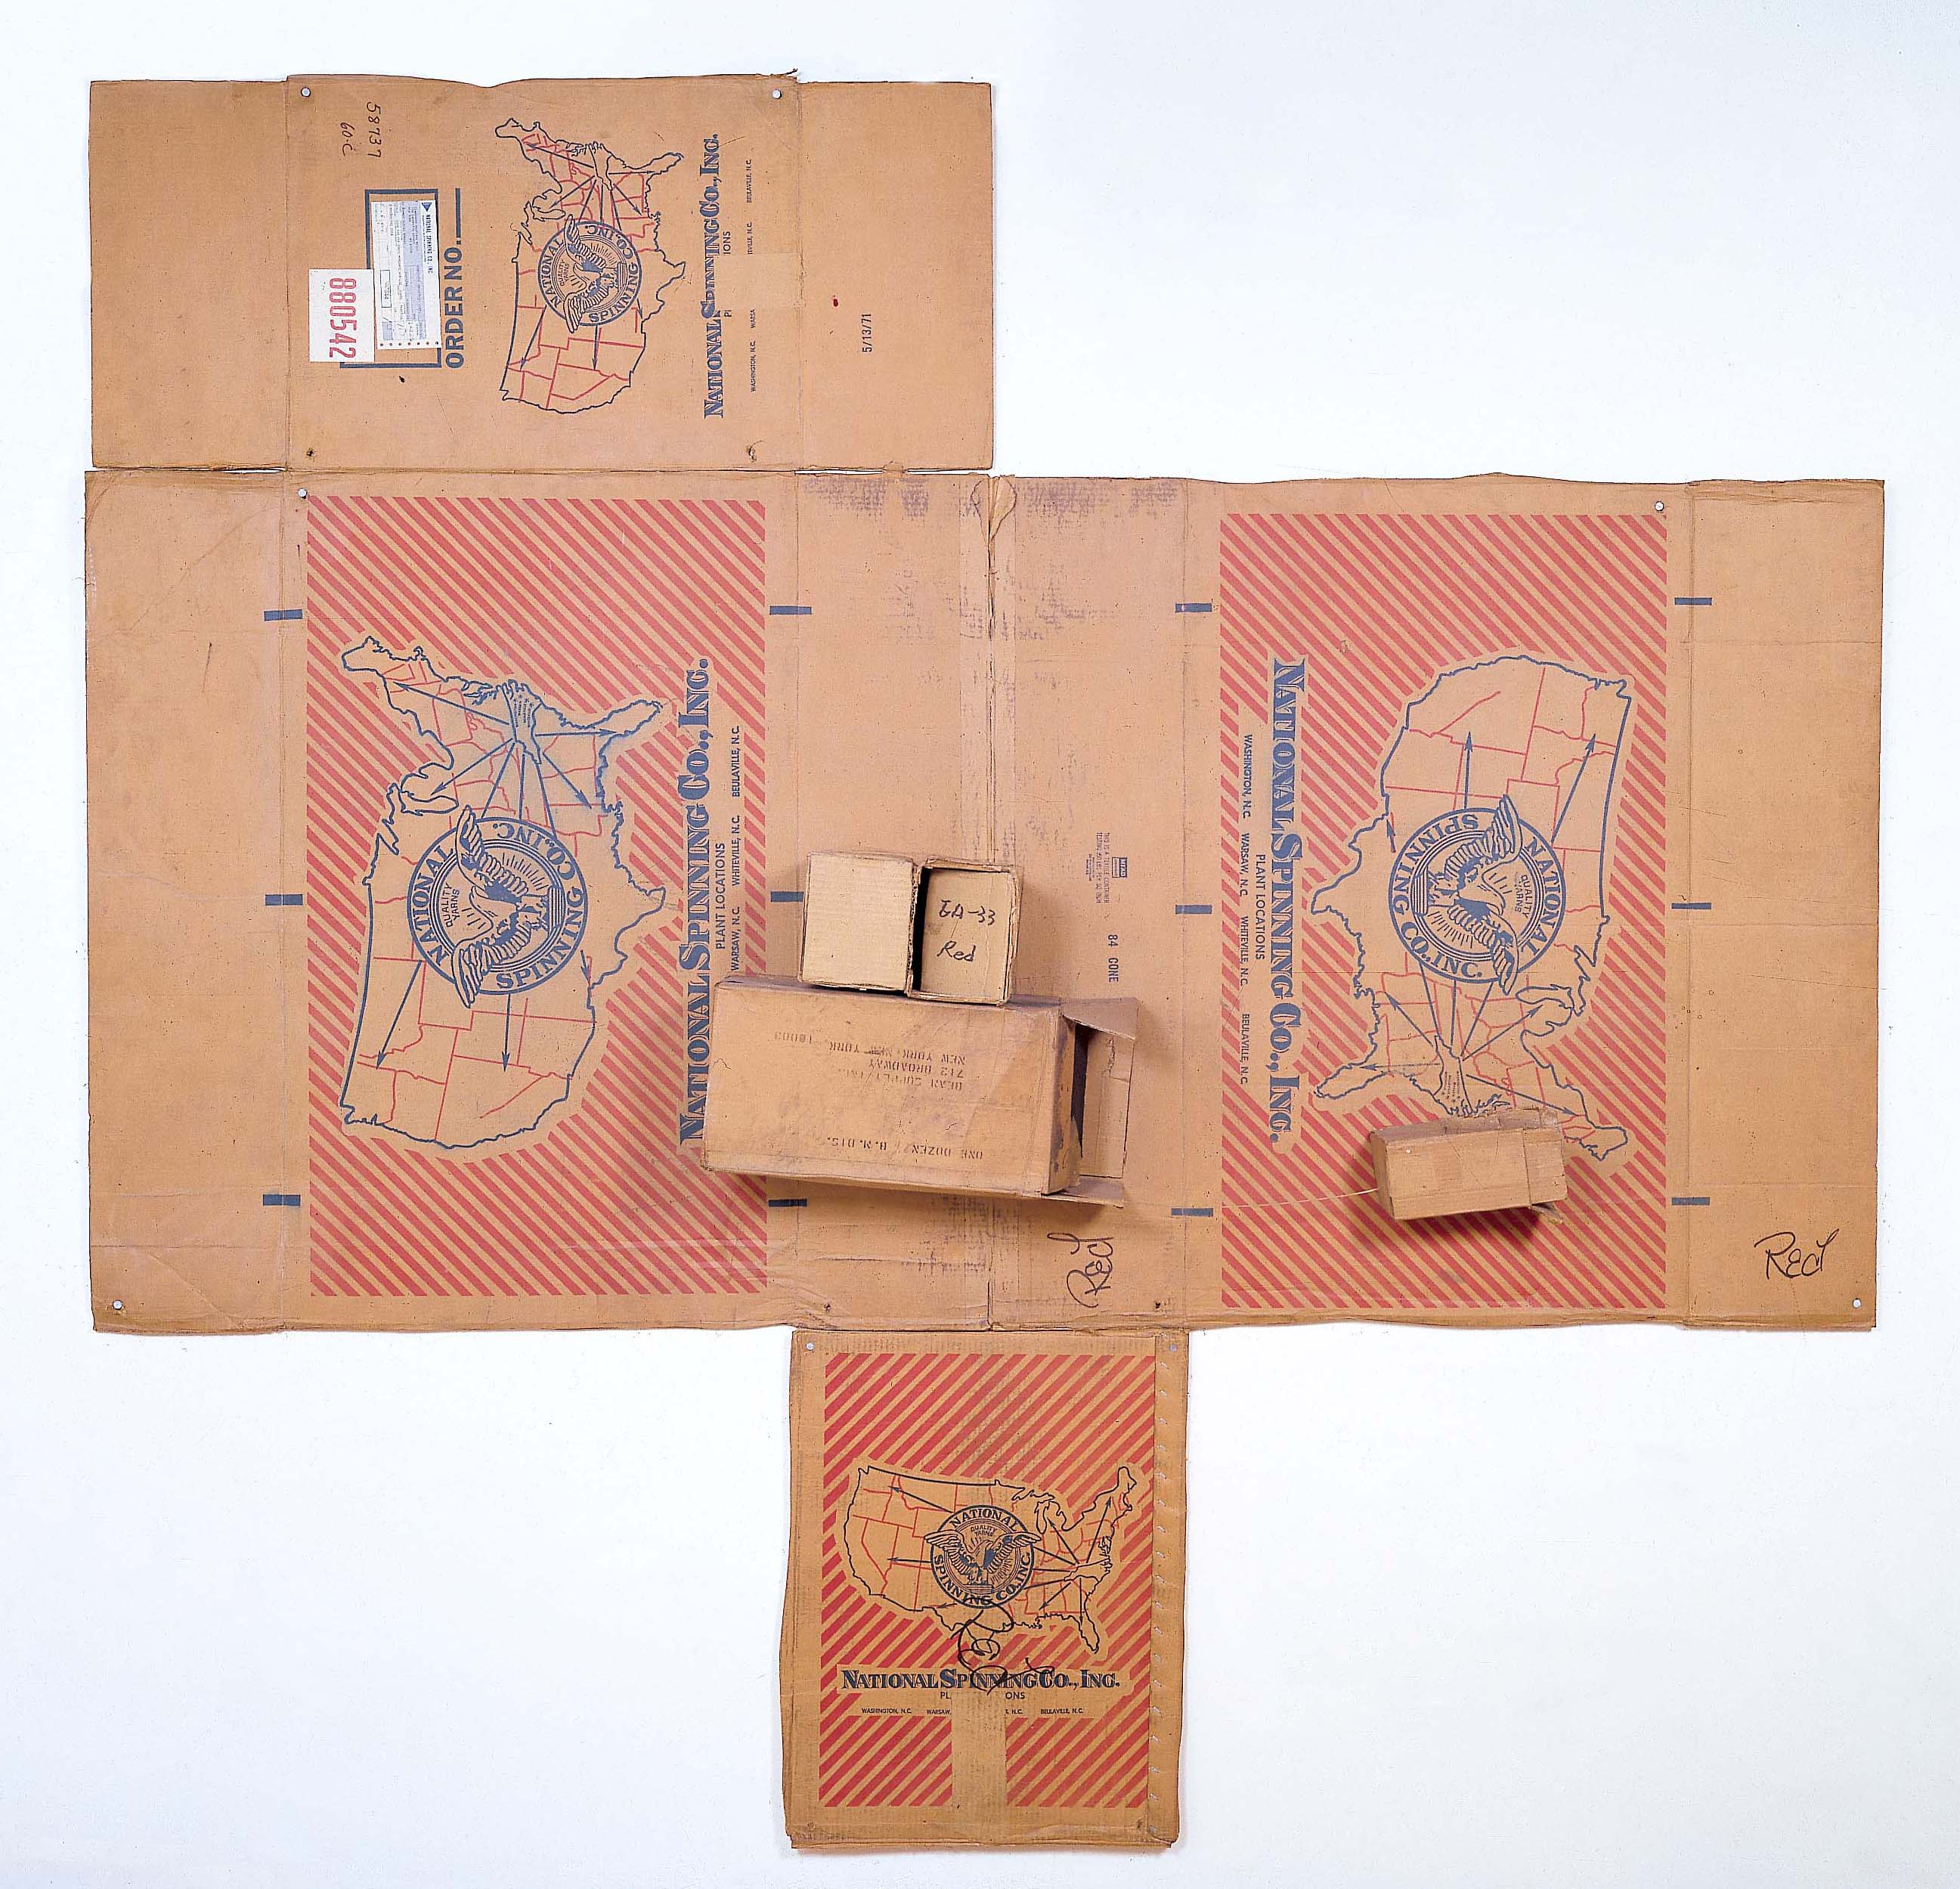 Robert Rauschenberg National Spinning / Red / Spring (Cardboard), 1971 Cardboard and string 100 x 98 1/2 x 8 1/2 inches (254 x 250.2 x 21.6 cm) The Menil Collection, Houston Purchase, with funds contributed by the Brown Foundation, Inc., and the following Menil Board of Trustees: Louisa Stude Sarofim, Frances R. Dittmer, Estate of James Elkins, Jr., Windi Grimes, Agnes Gund, Janie C. Lee, Isabel S. Lummis, Roy Nolen, Charles Wright, Michael Zilkha, 2005 -014 ©Robert Rauschenberg Foundation